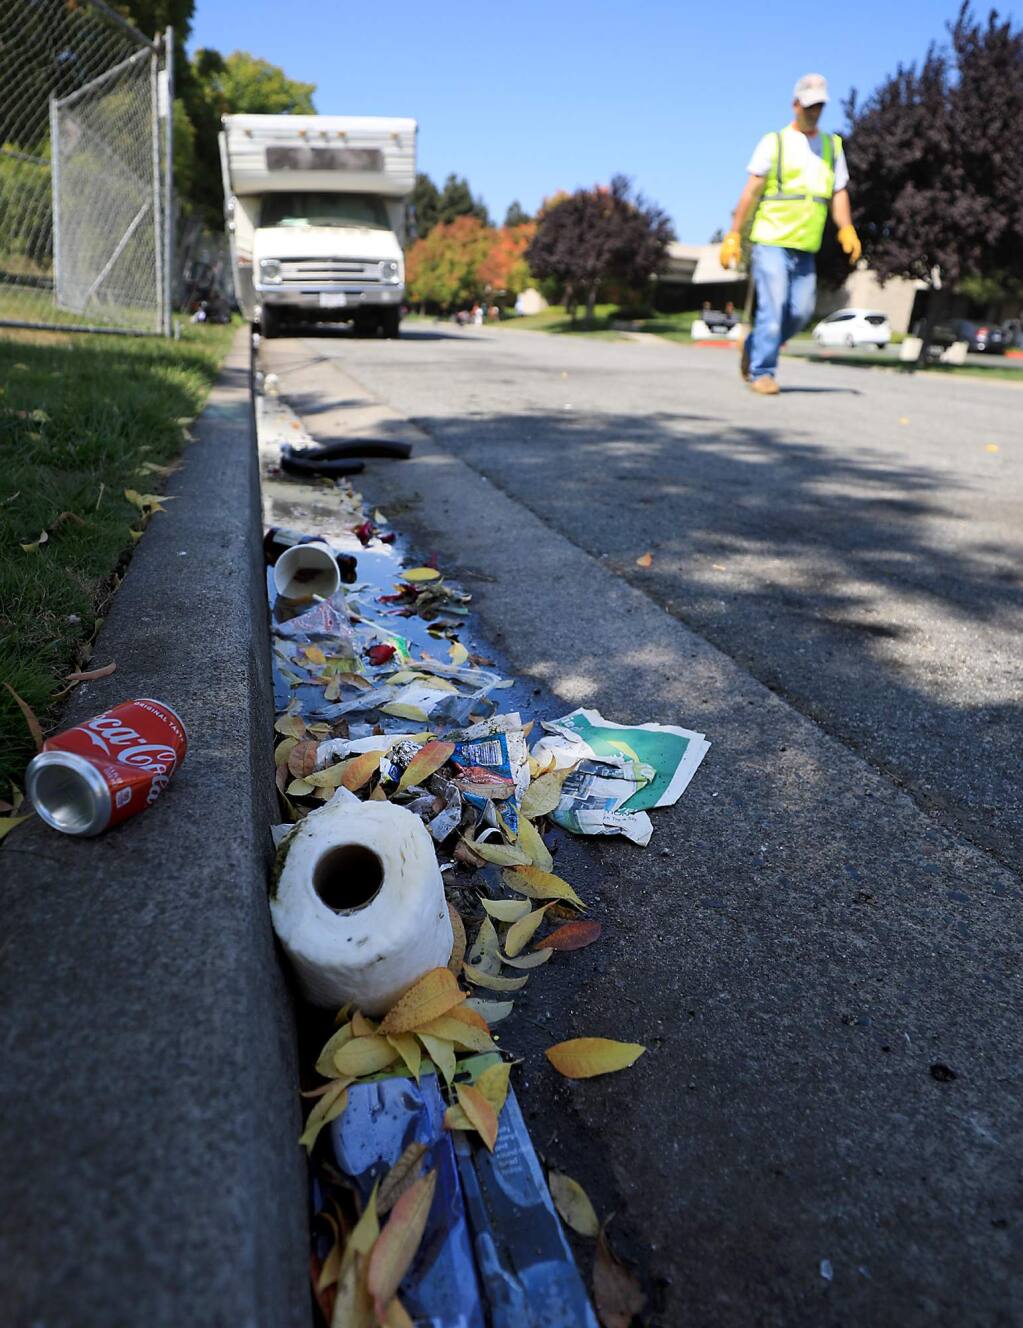 Garbage and debris clog a gutter att Northpoint Corporate Center in Santa Rosa, Wednesday, August 29, 2018. Tent camps and motor homes populate the area. (Kent Porter / The Press Democrat) 2018